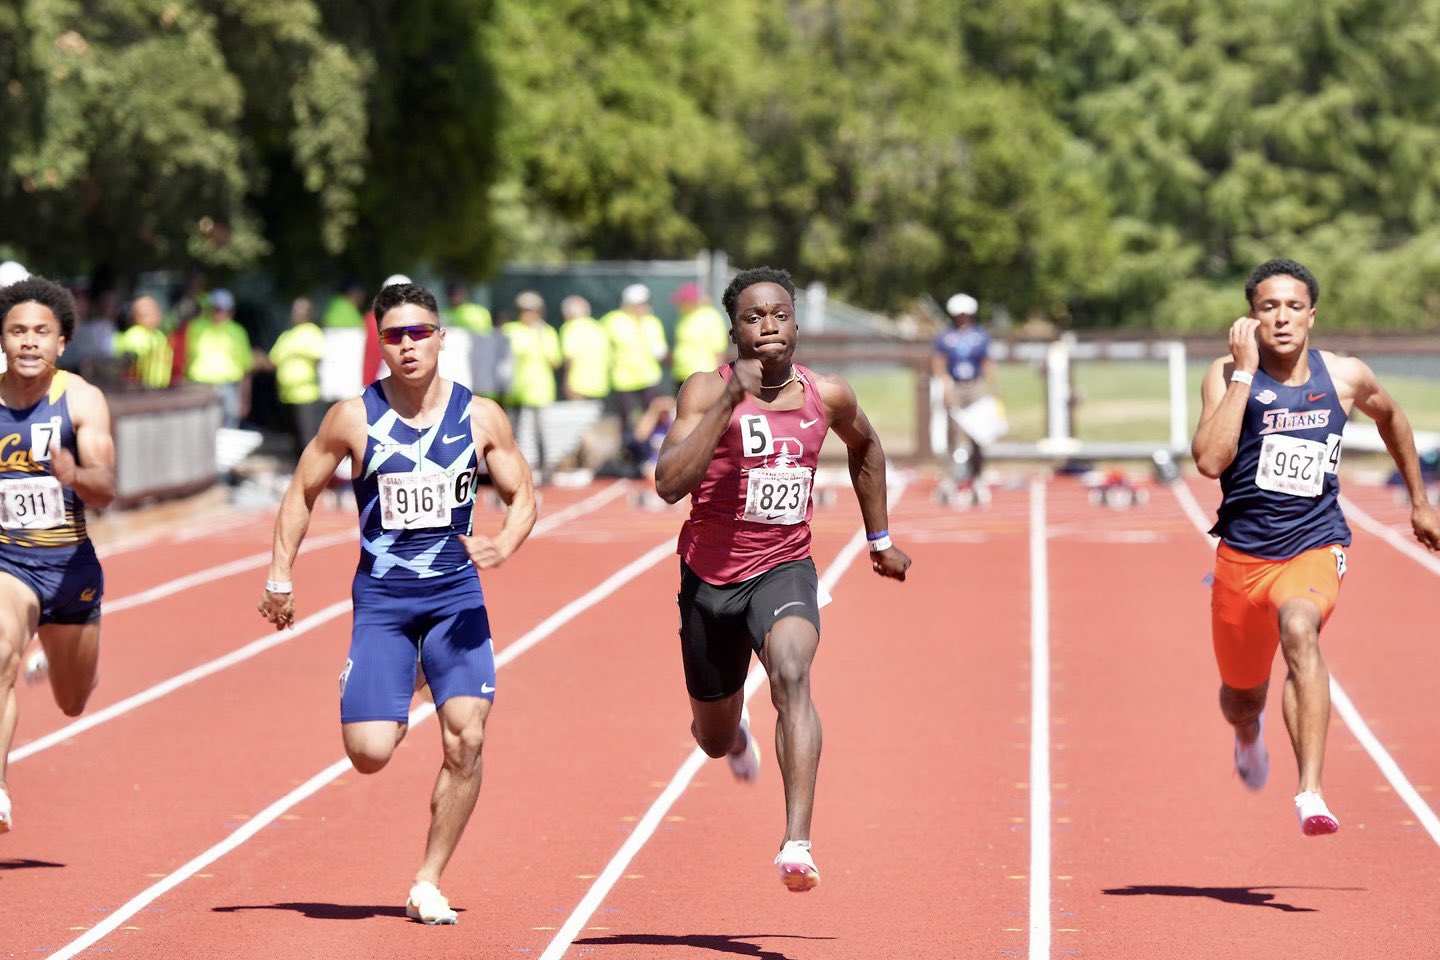 Onwuzurike Successfully Completes Sprints Double At Stanford Invitational Meet